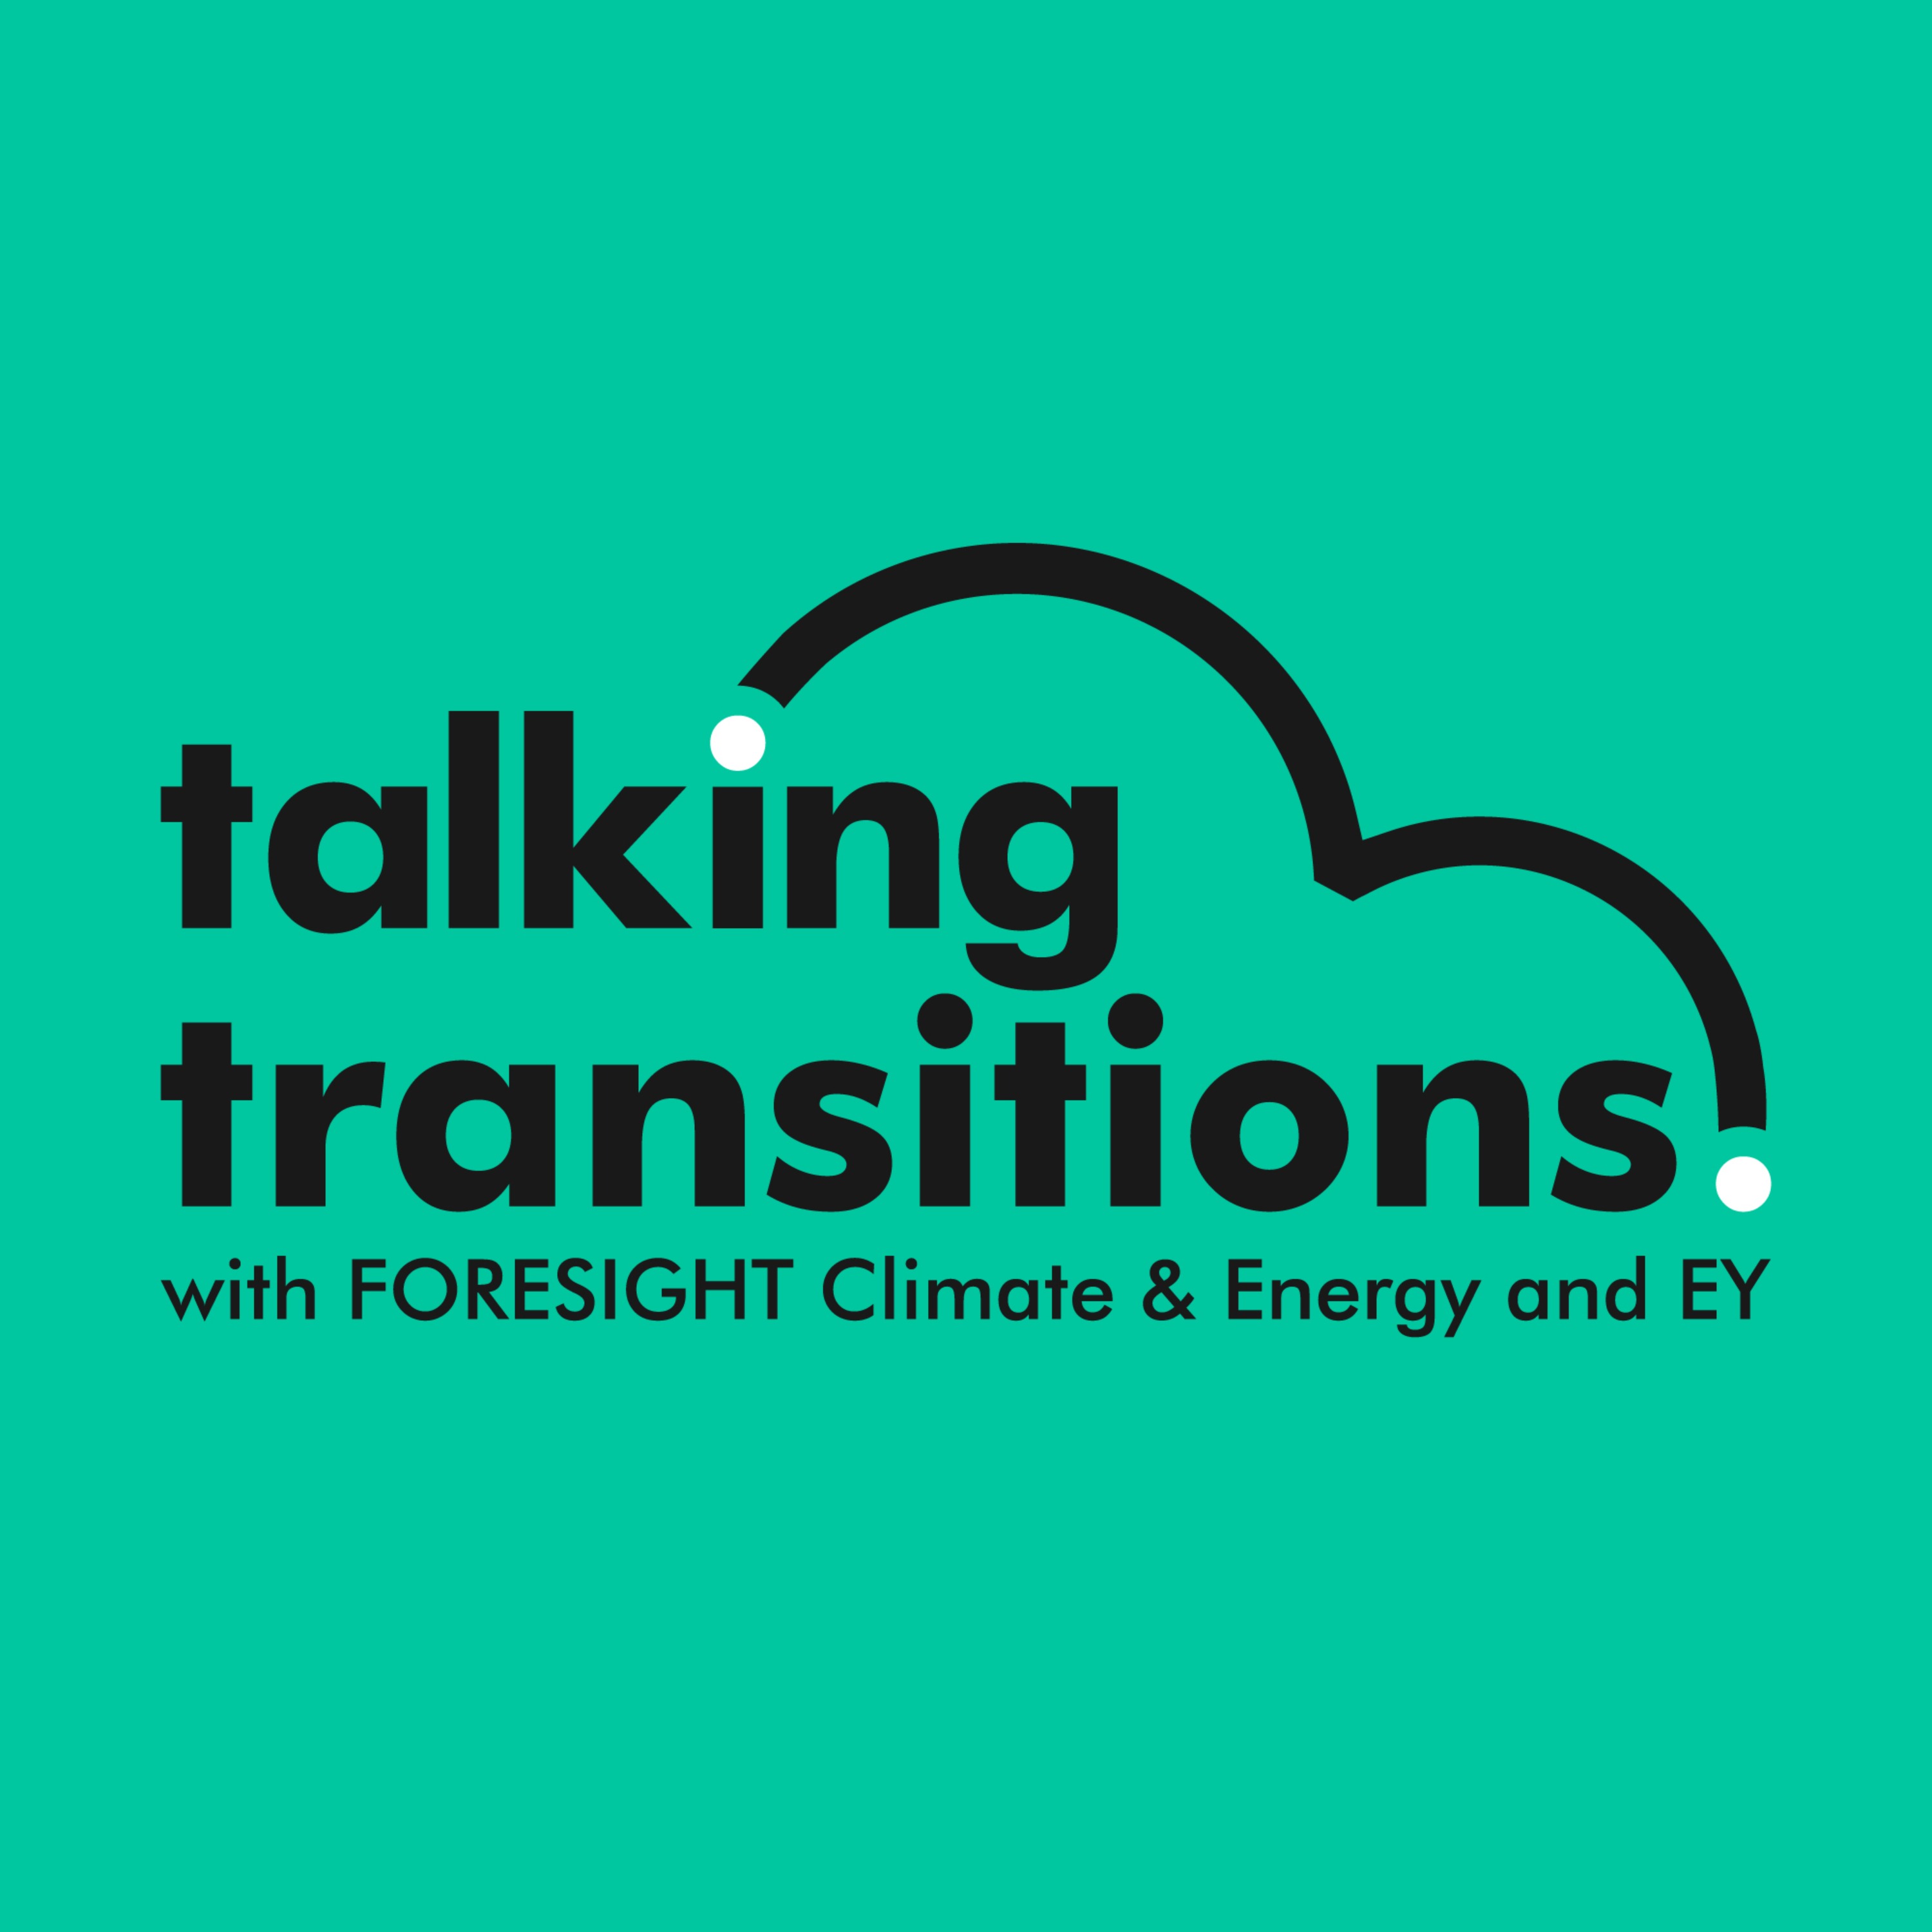 Balancing security and sustainability in the energy transition